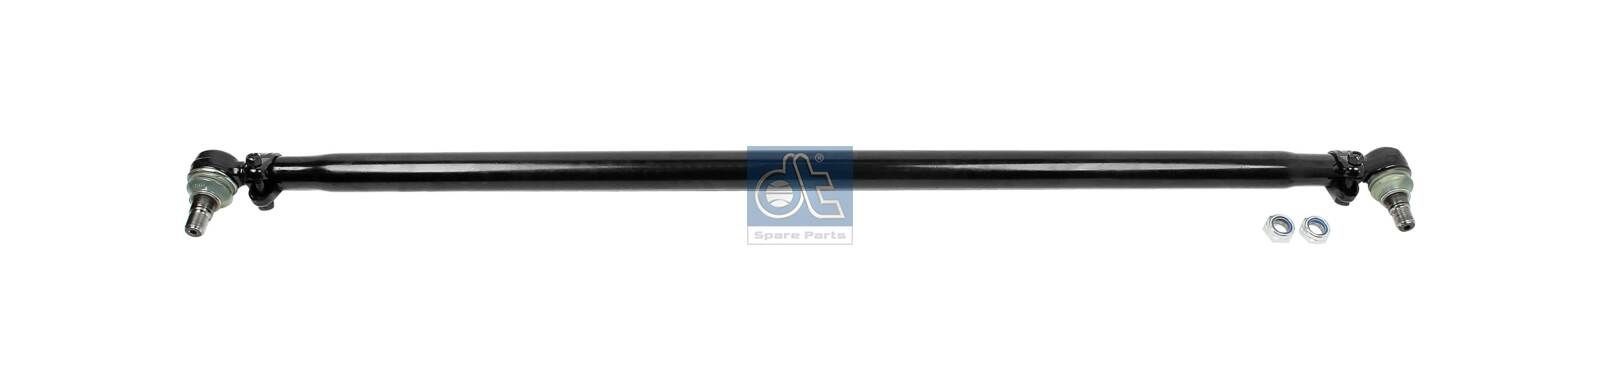 DT Spare Parts 3.63029 Rod Assembly 81.46711.6720